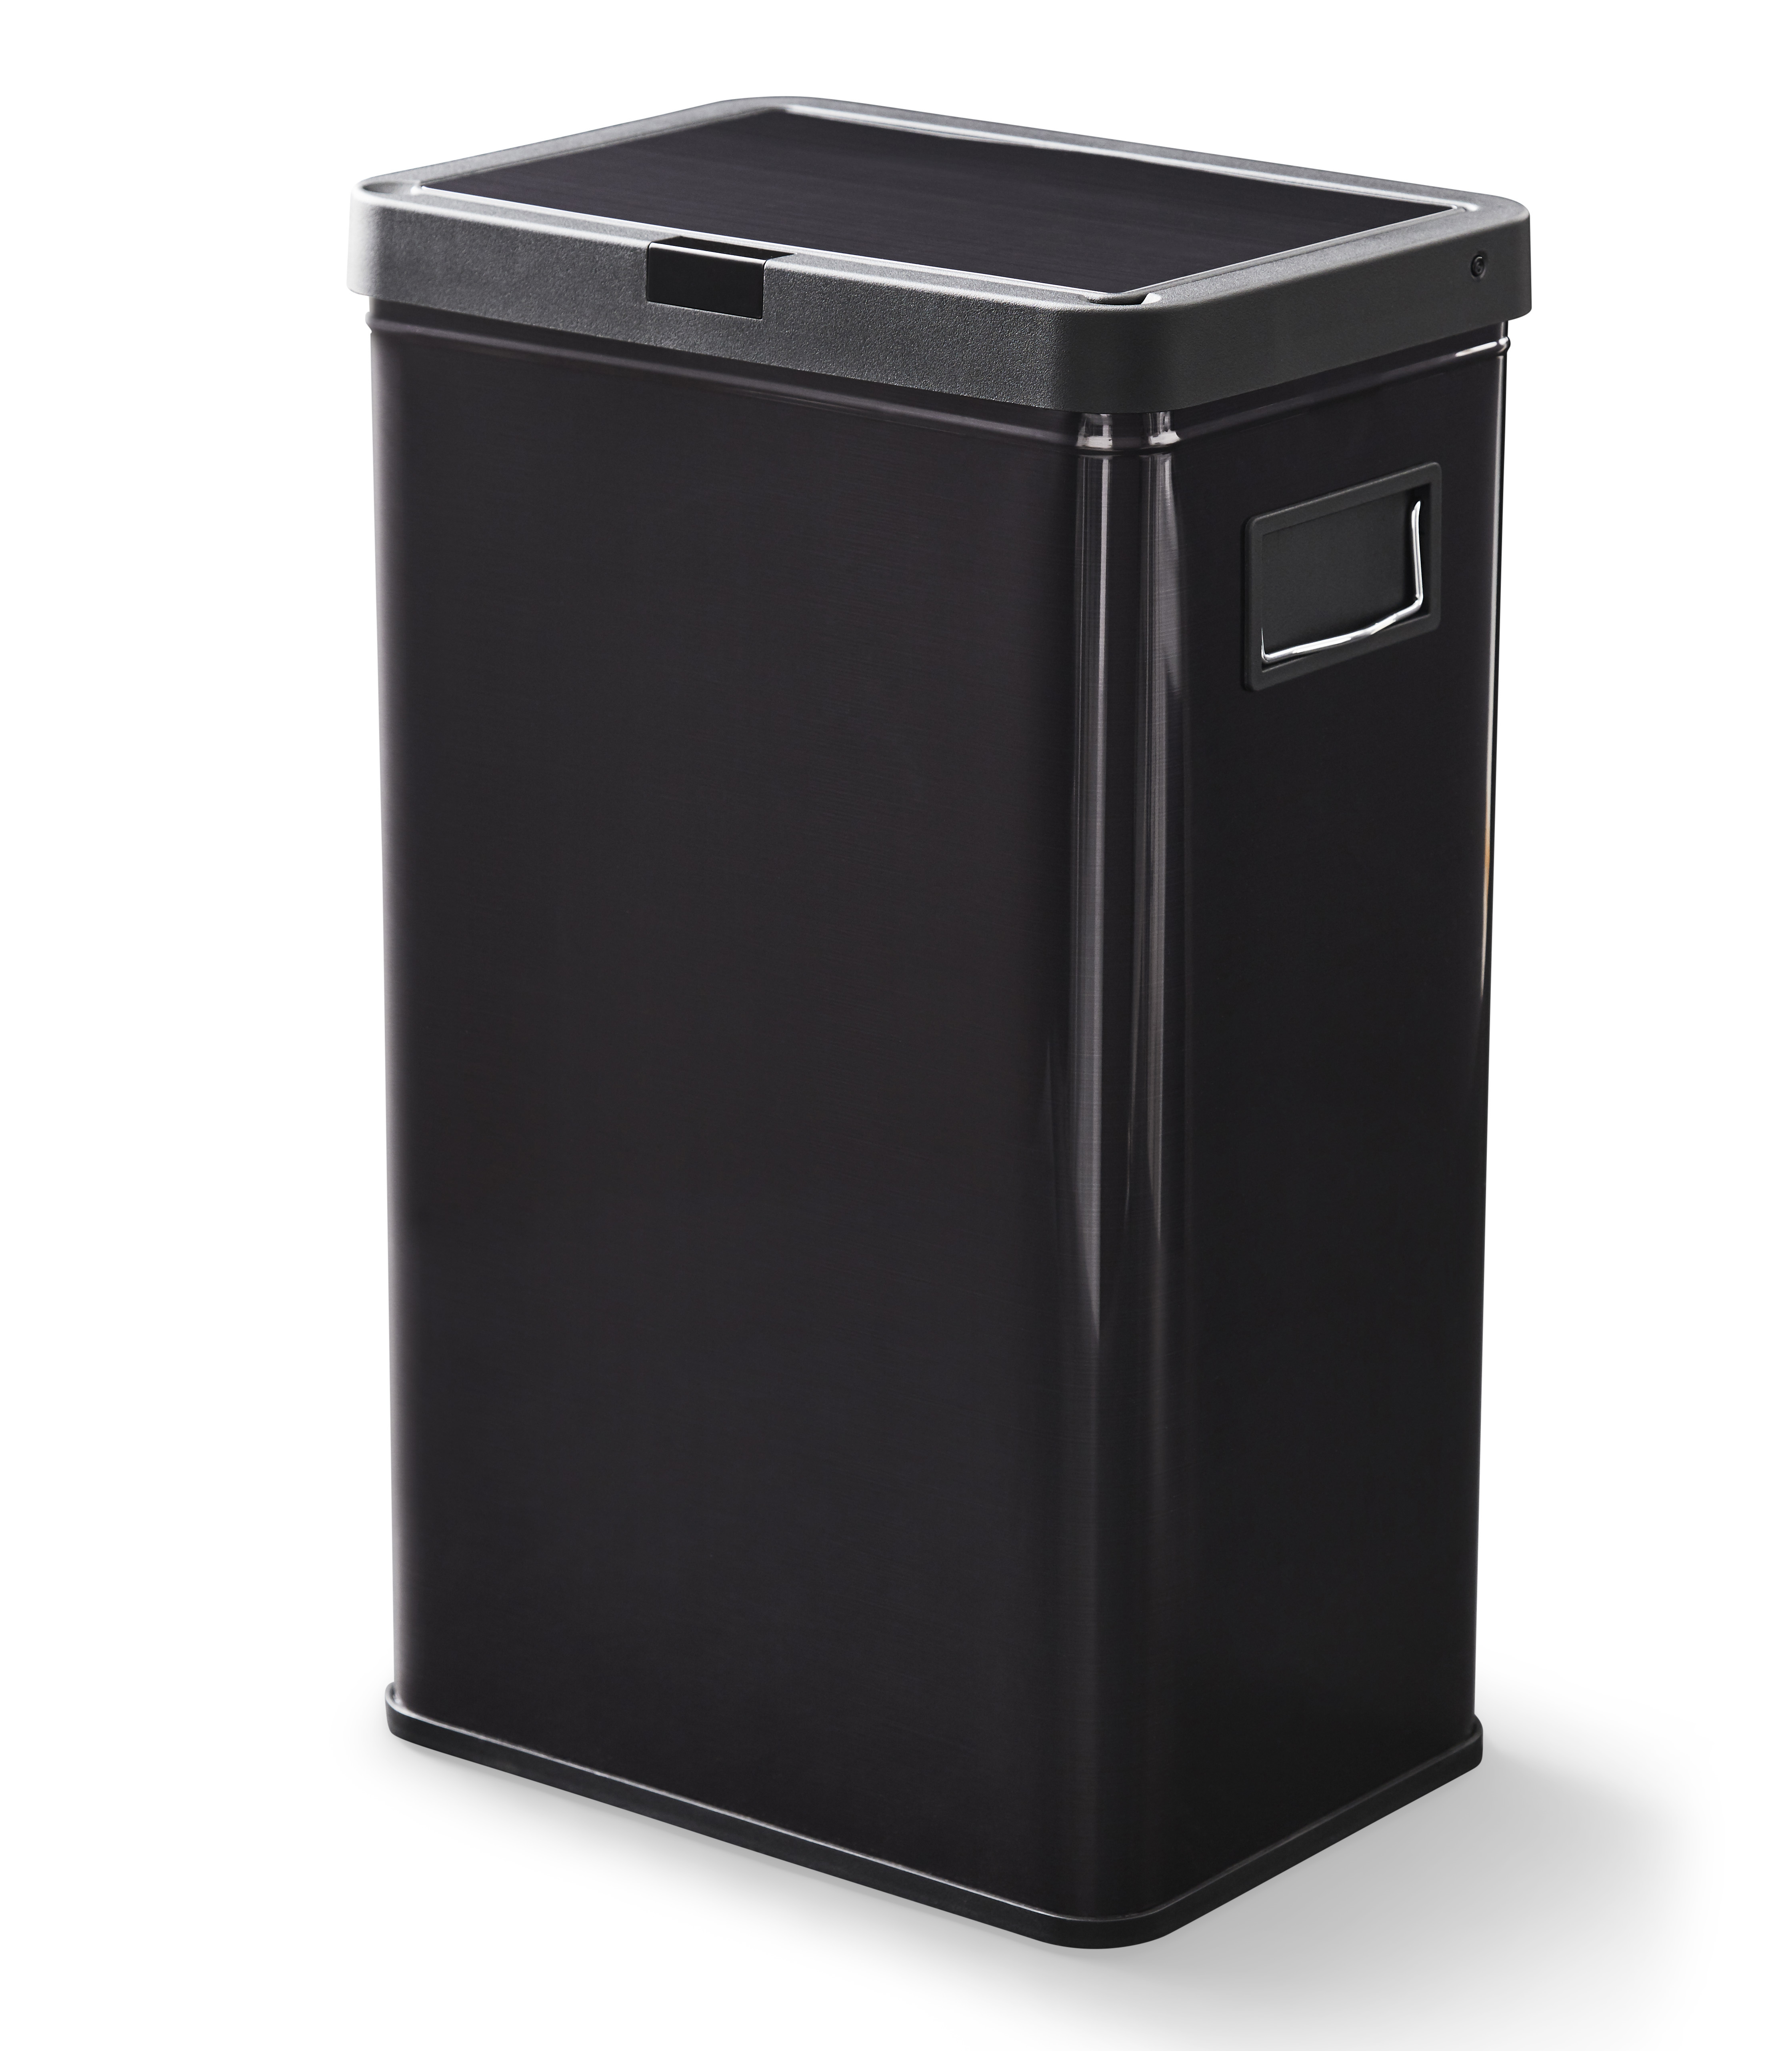 Better Homes & Gardens 13.7gal Stainless Steel Touchless Kitchen Garbage Can Black - image 1 of 14